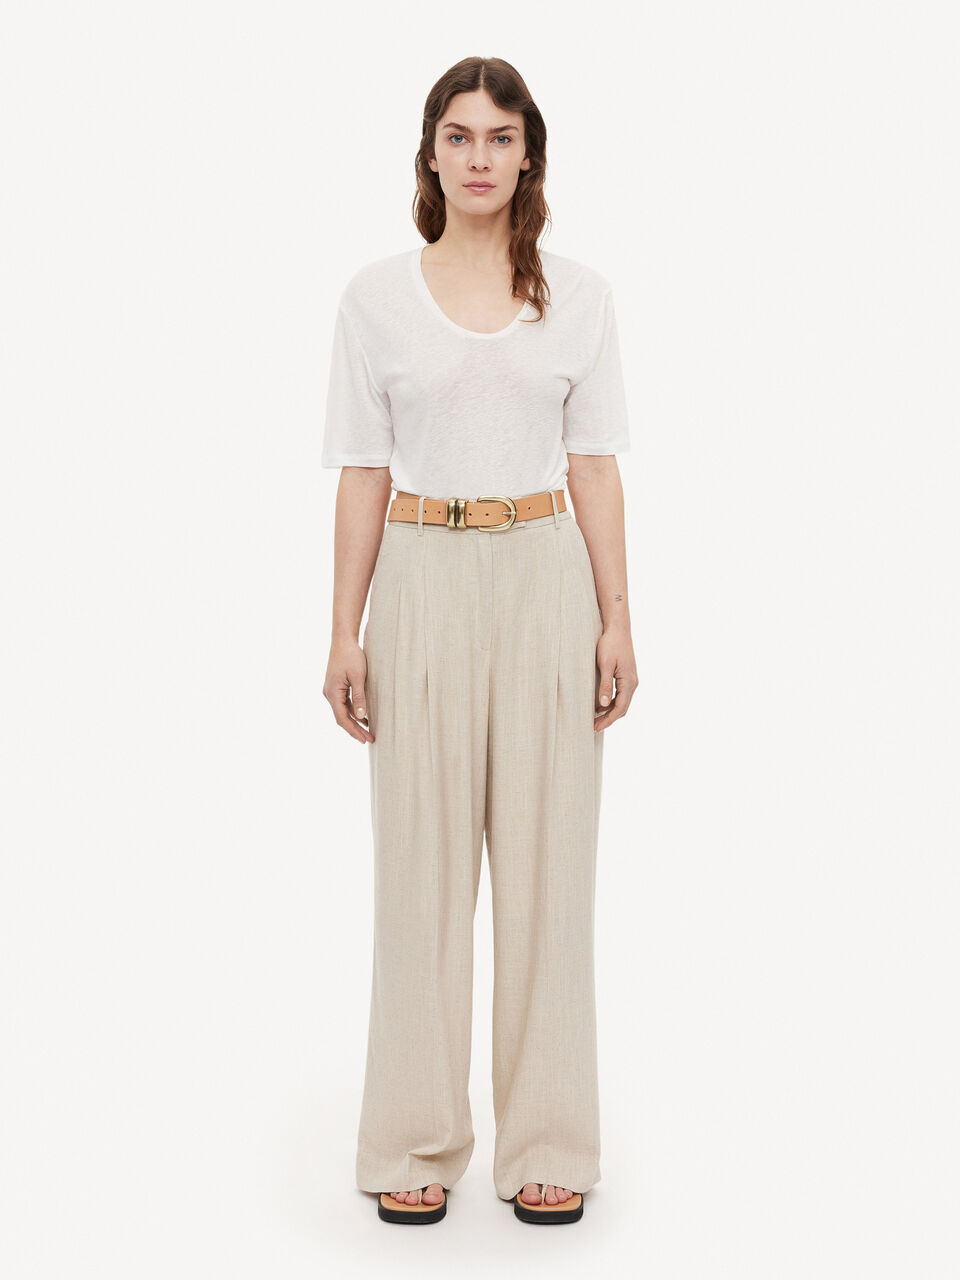 Cymbaria high-waisted trousers - Buy Winter sale online